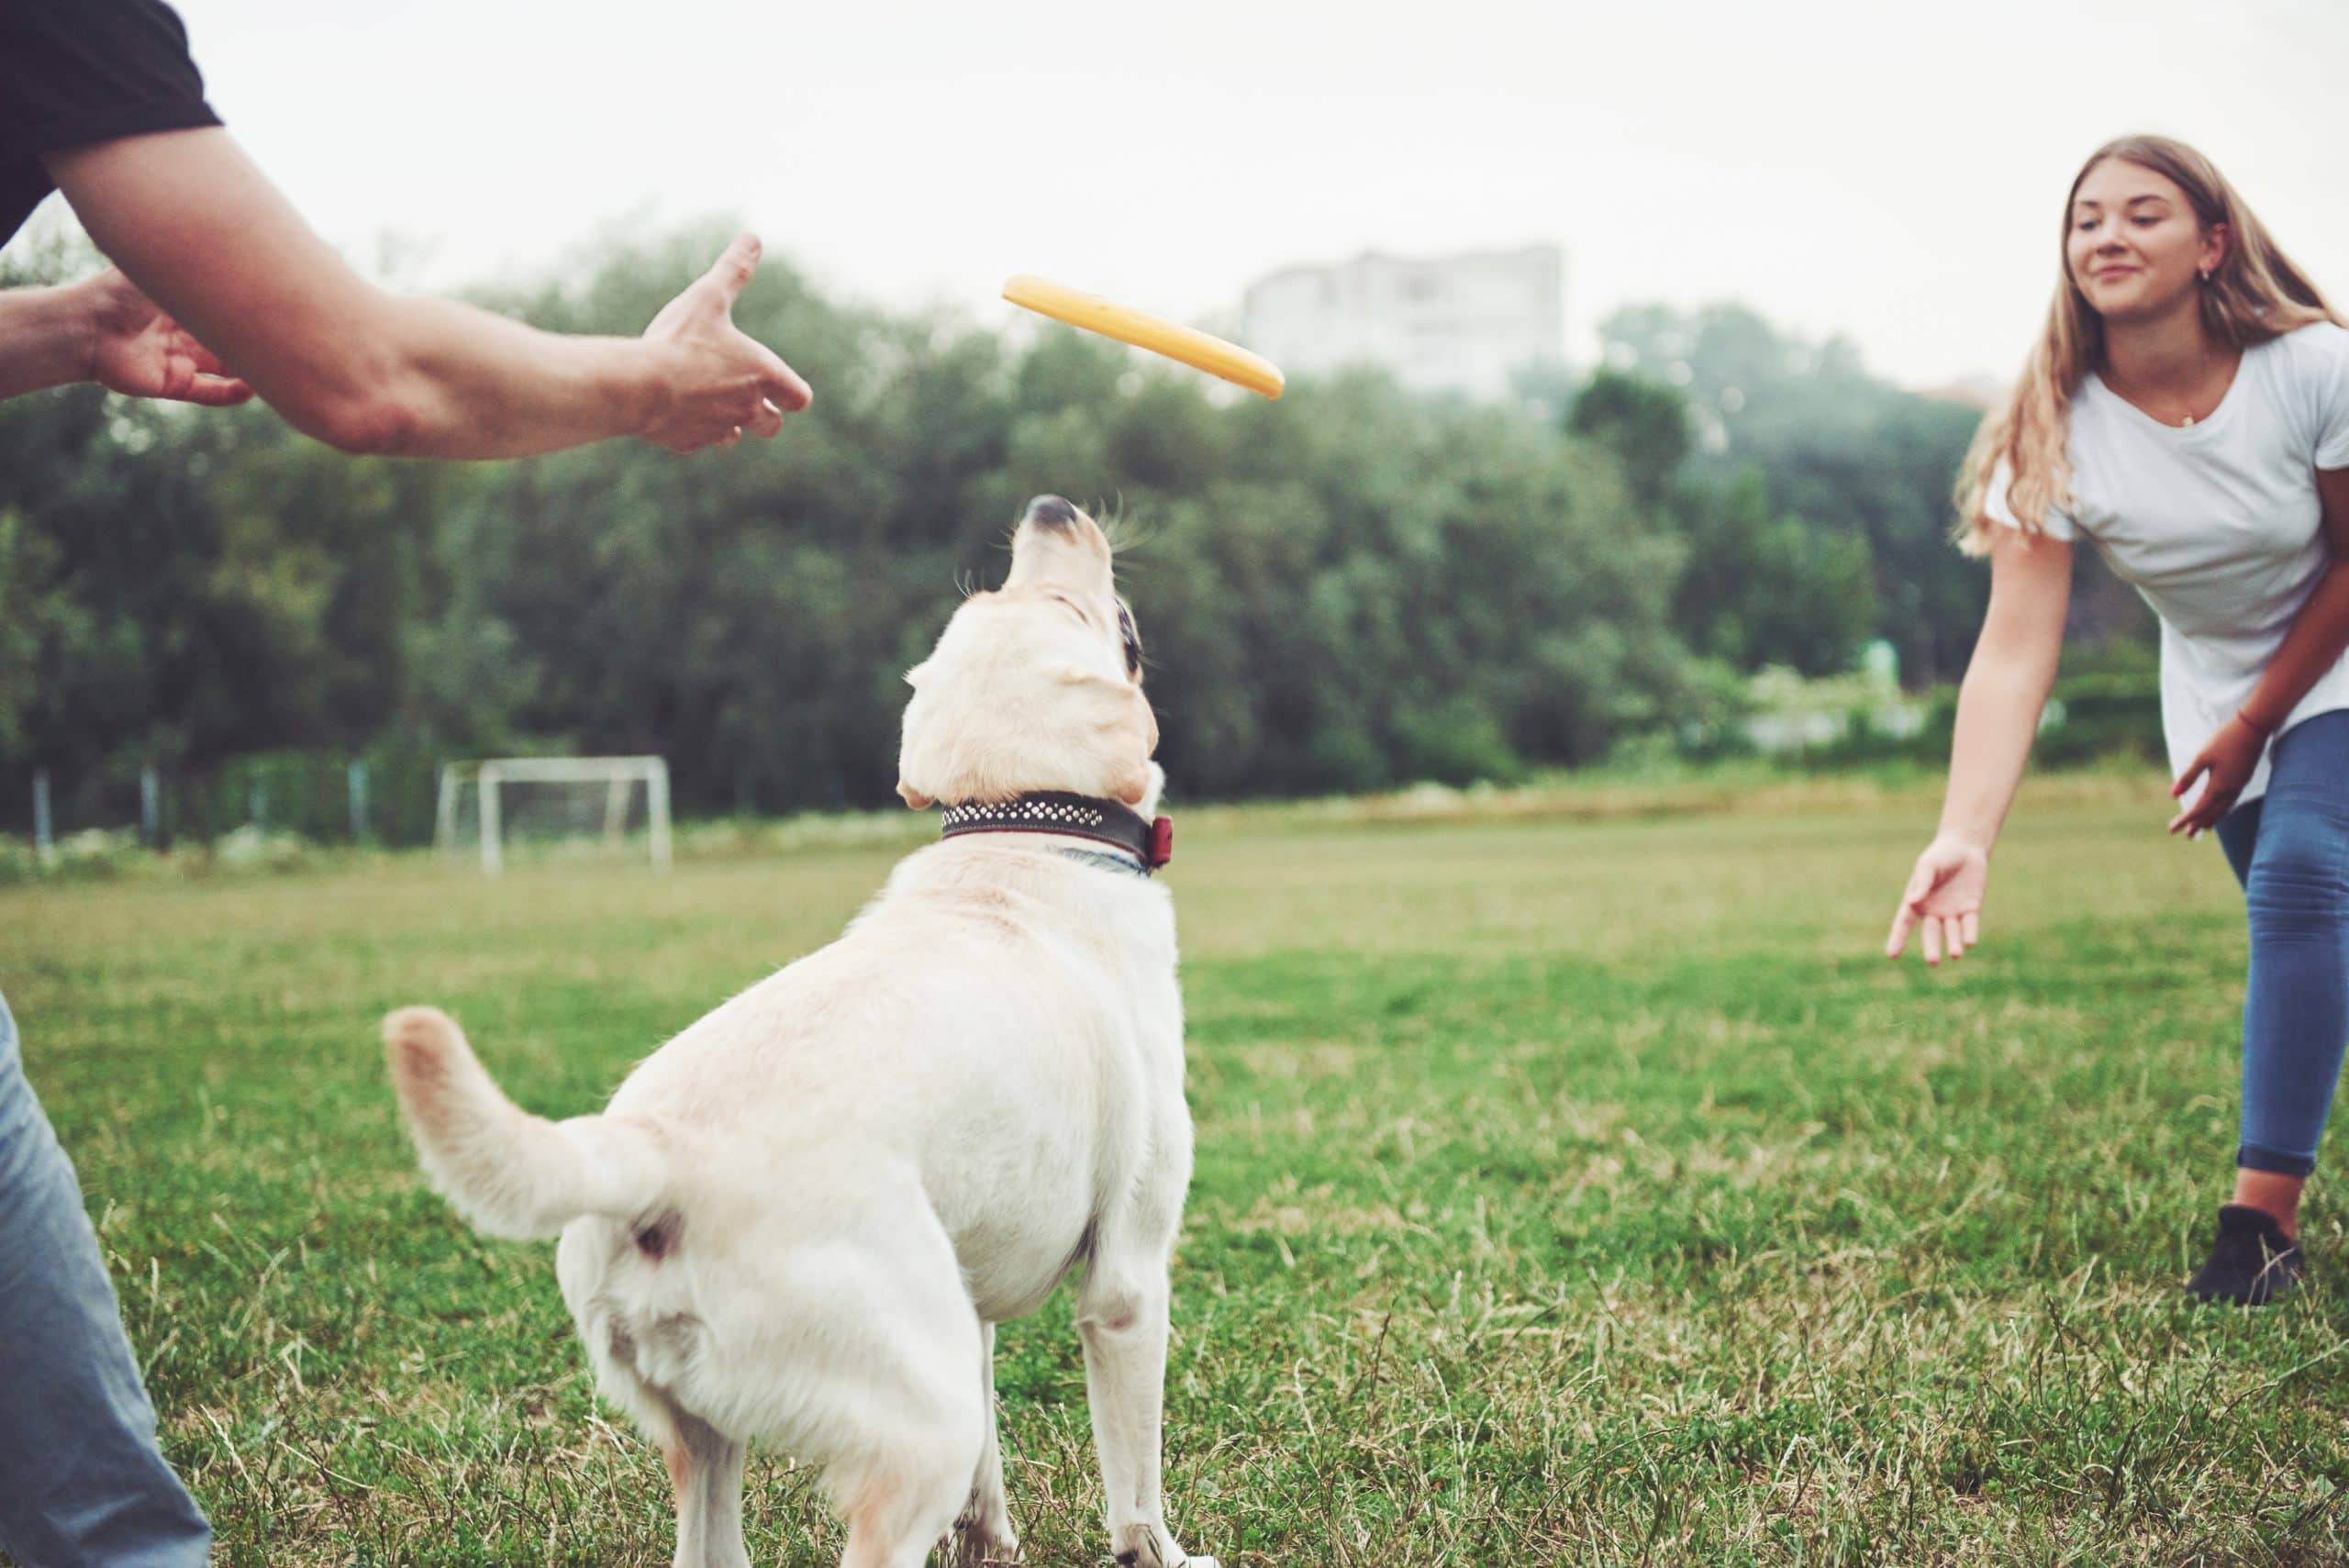 Why Do Dogs Like Tug of War So Much?